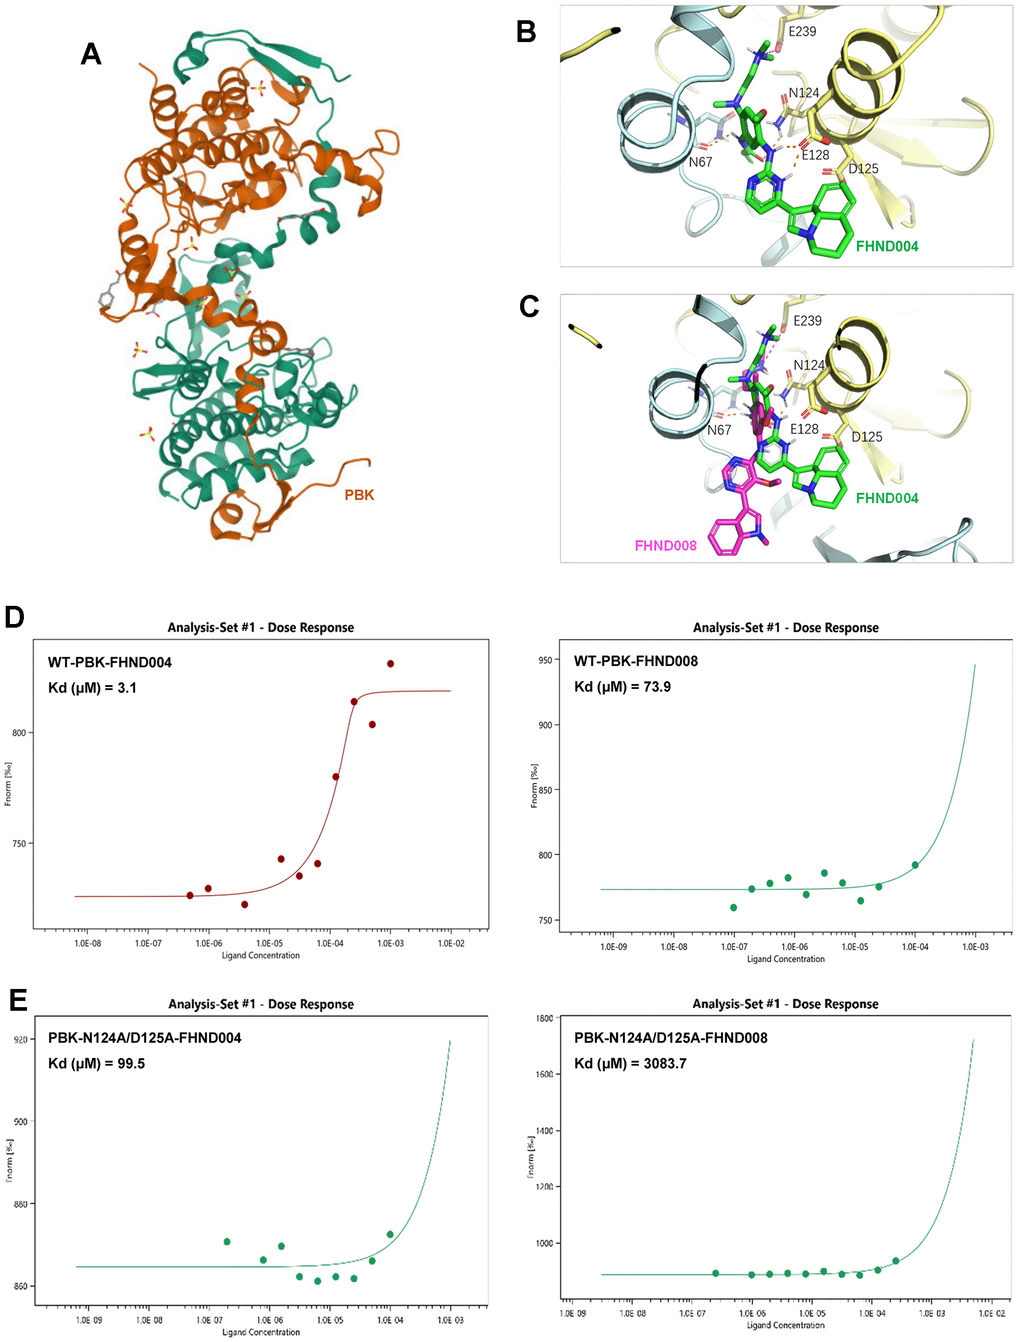 The affinity of FHND004 to PBK protein is better than FHND008. (A) The structure of PBK (PDB: 5J0A). (B, C) The molecular docking of FHND004 and FHND008 with PBK. The green stick in B is FHND004, the red stick in C is FHND008, the PBK is represented by a yellow cartoon, and the hydrogen bond is represented by a dotted line. (D) MST results of FHND004 and FHND008 on PBK wild type. The results showed that the affinity between FHND004 and PBK was better than that of FHND008. (E) MST results after double mutation of N124A and D125A in PBK. The results showed that the affinity of PBK double mutation to FHND004 and FHND008 was significantly decreased.